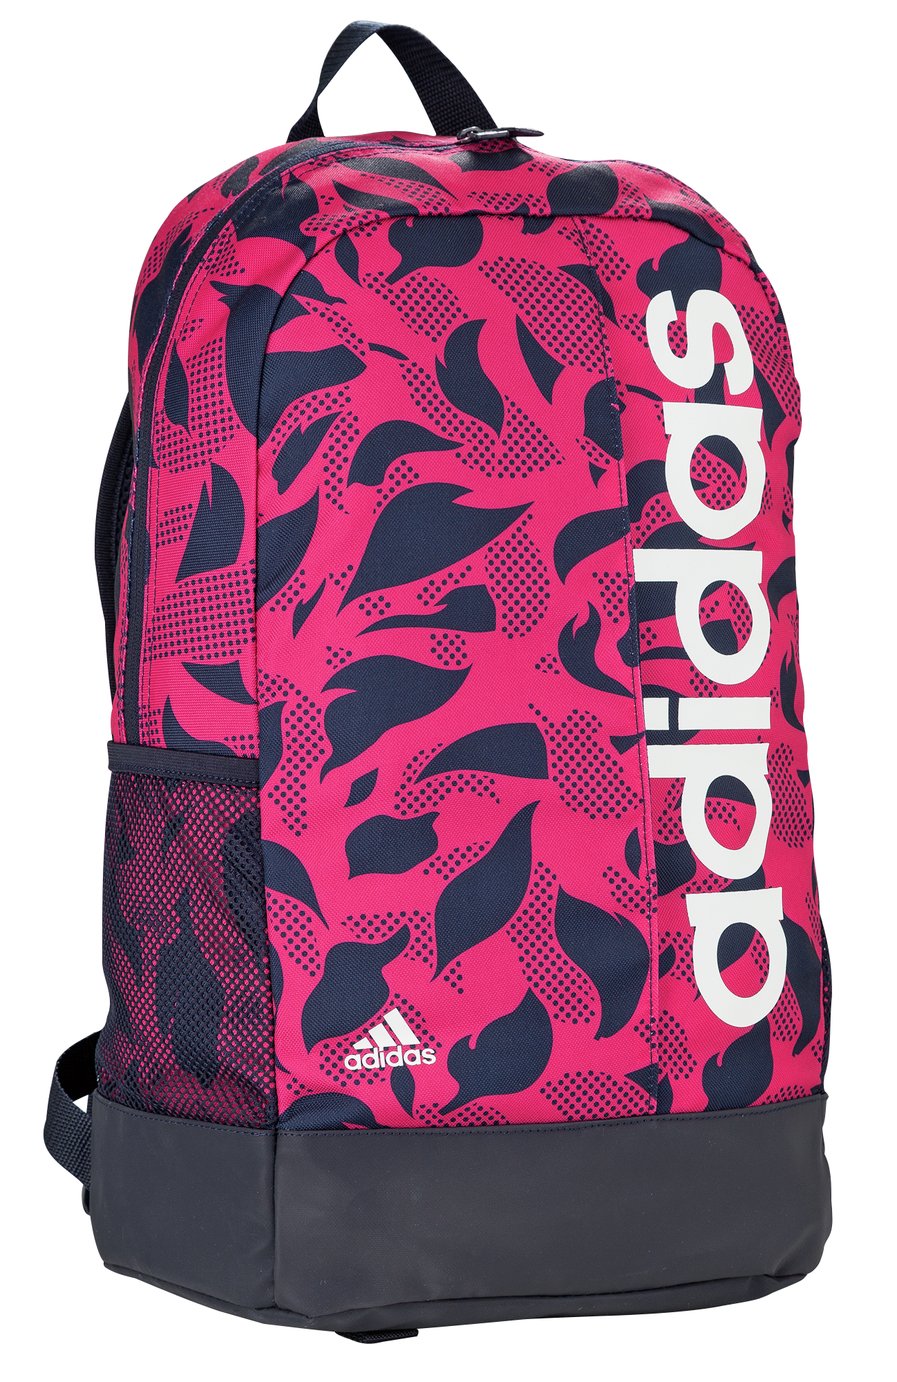 Adidas Linear Backpack Reviews